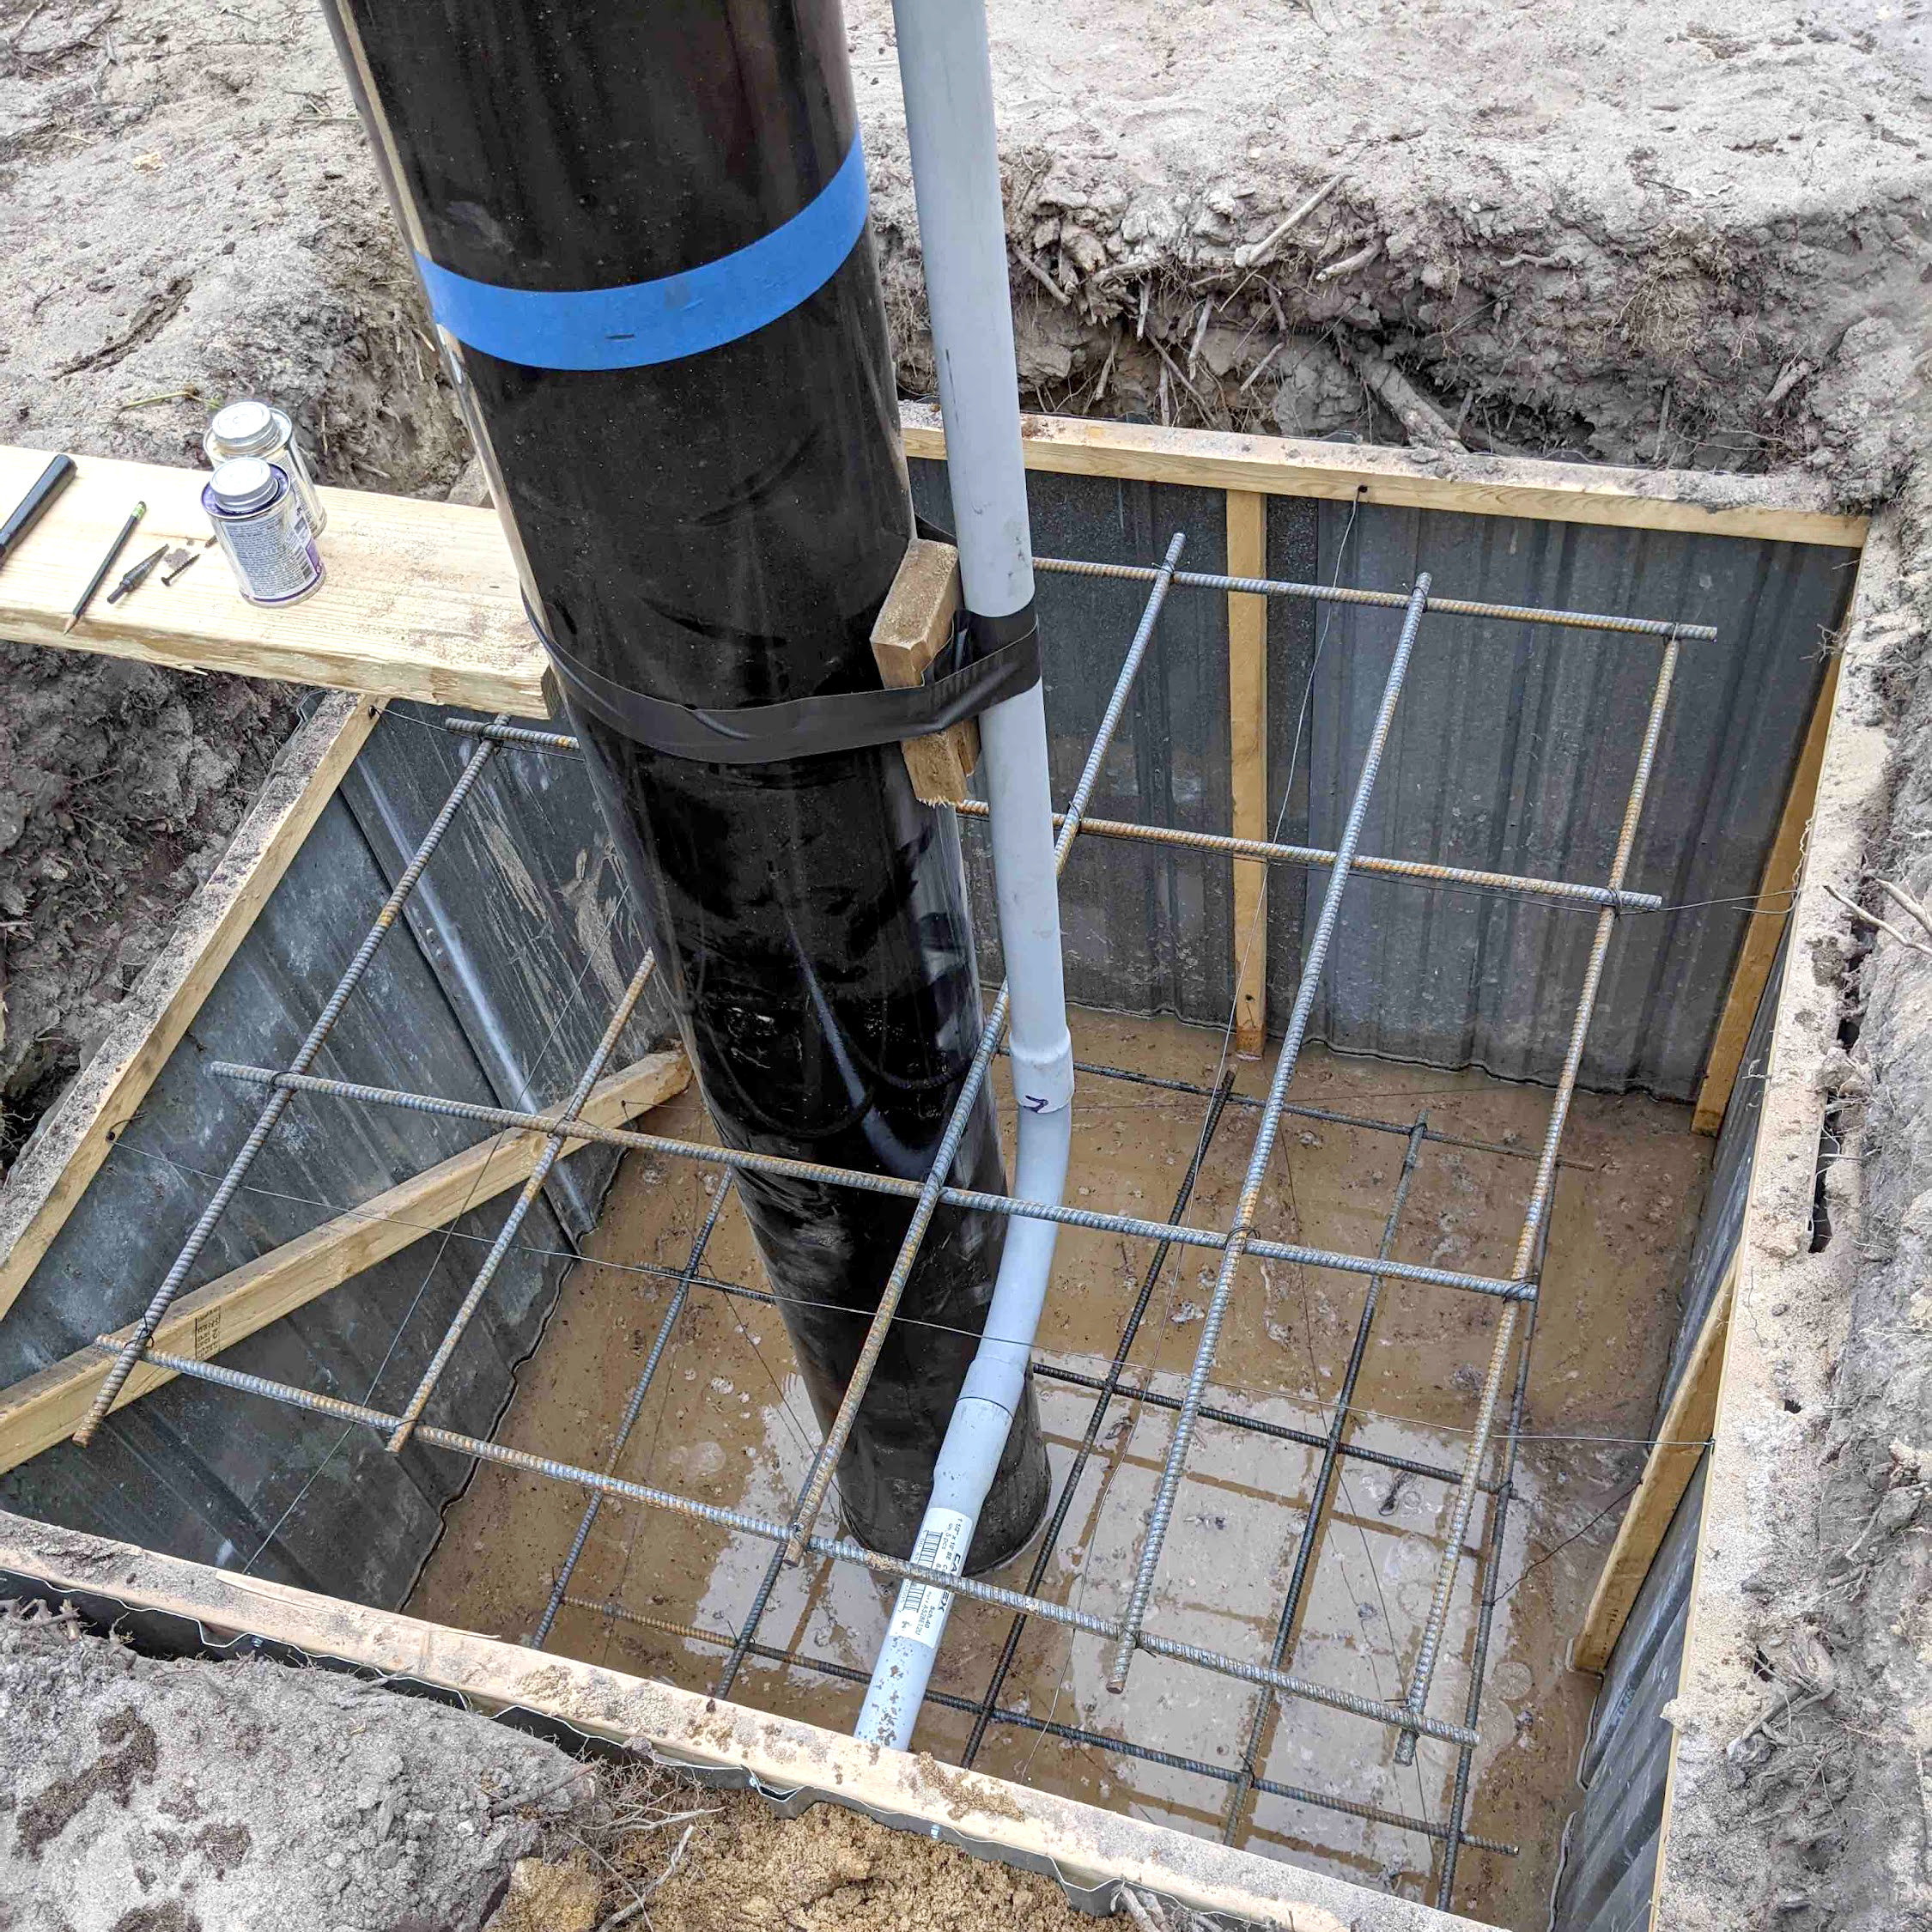 A conduit is placed between the pole and wires for solar mount installation.